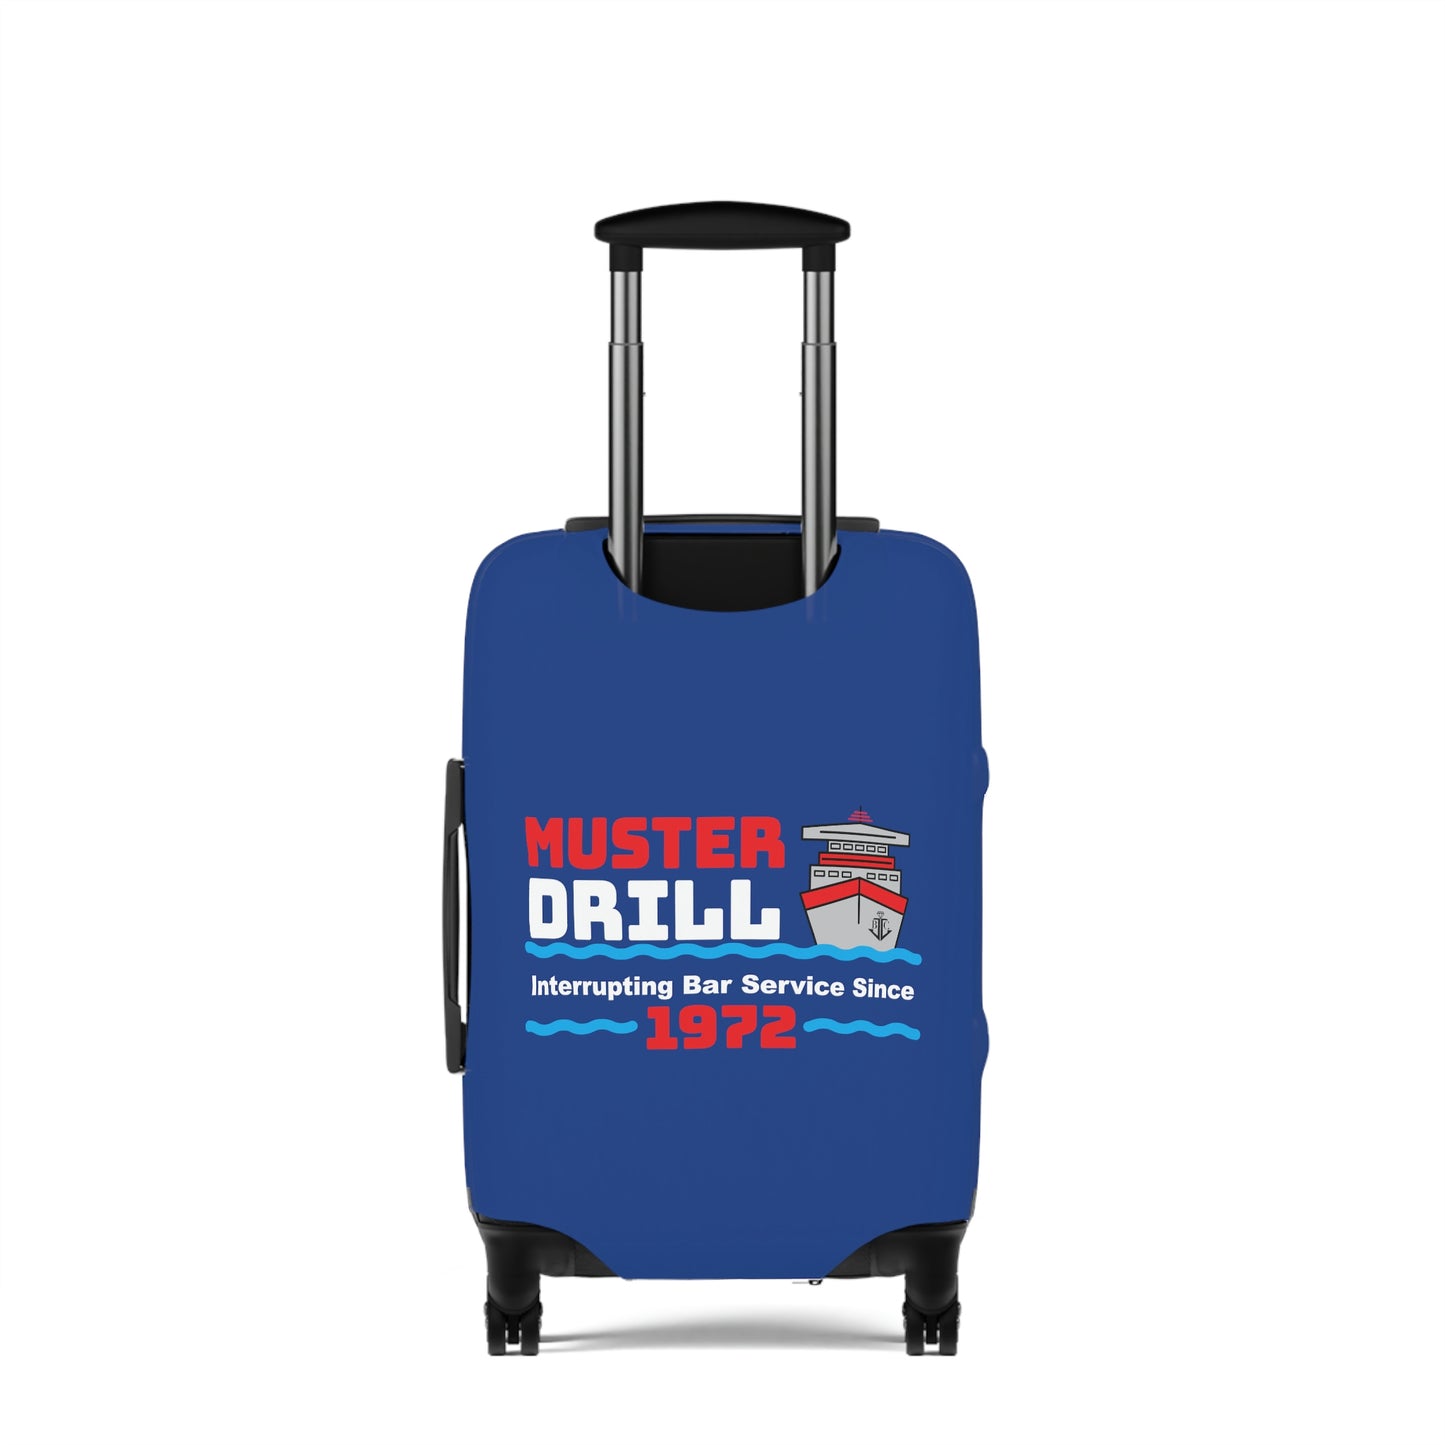 Muster Drill Interrupting Bar Service Since 1972 –Luggage Cover